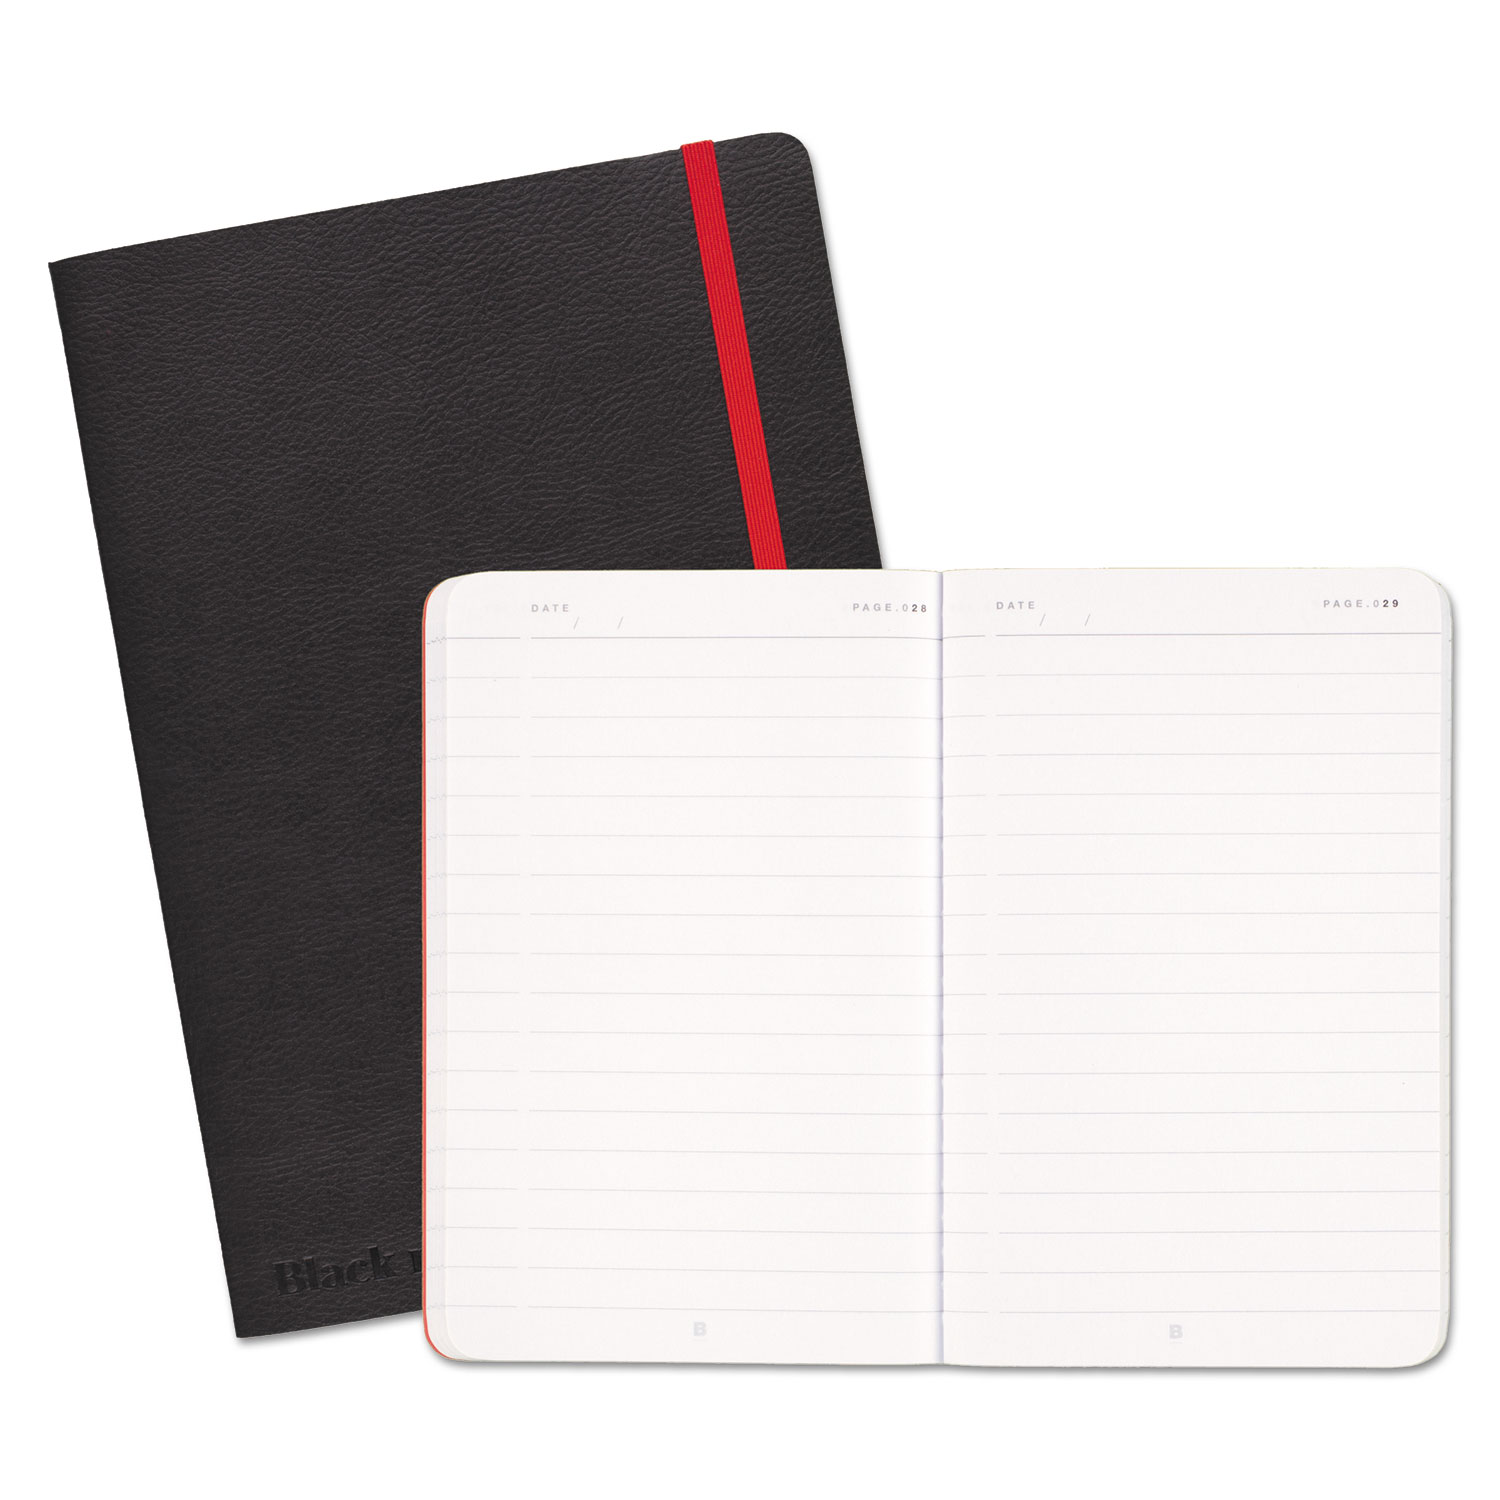  Black n' Red 400065000 Black Soft Cover Notebook, Wide/Legal Rule, Black Cover, 8.25 x 5.75, 71 Sheets (JDK400065000) 